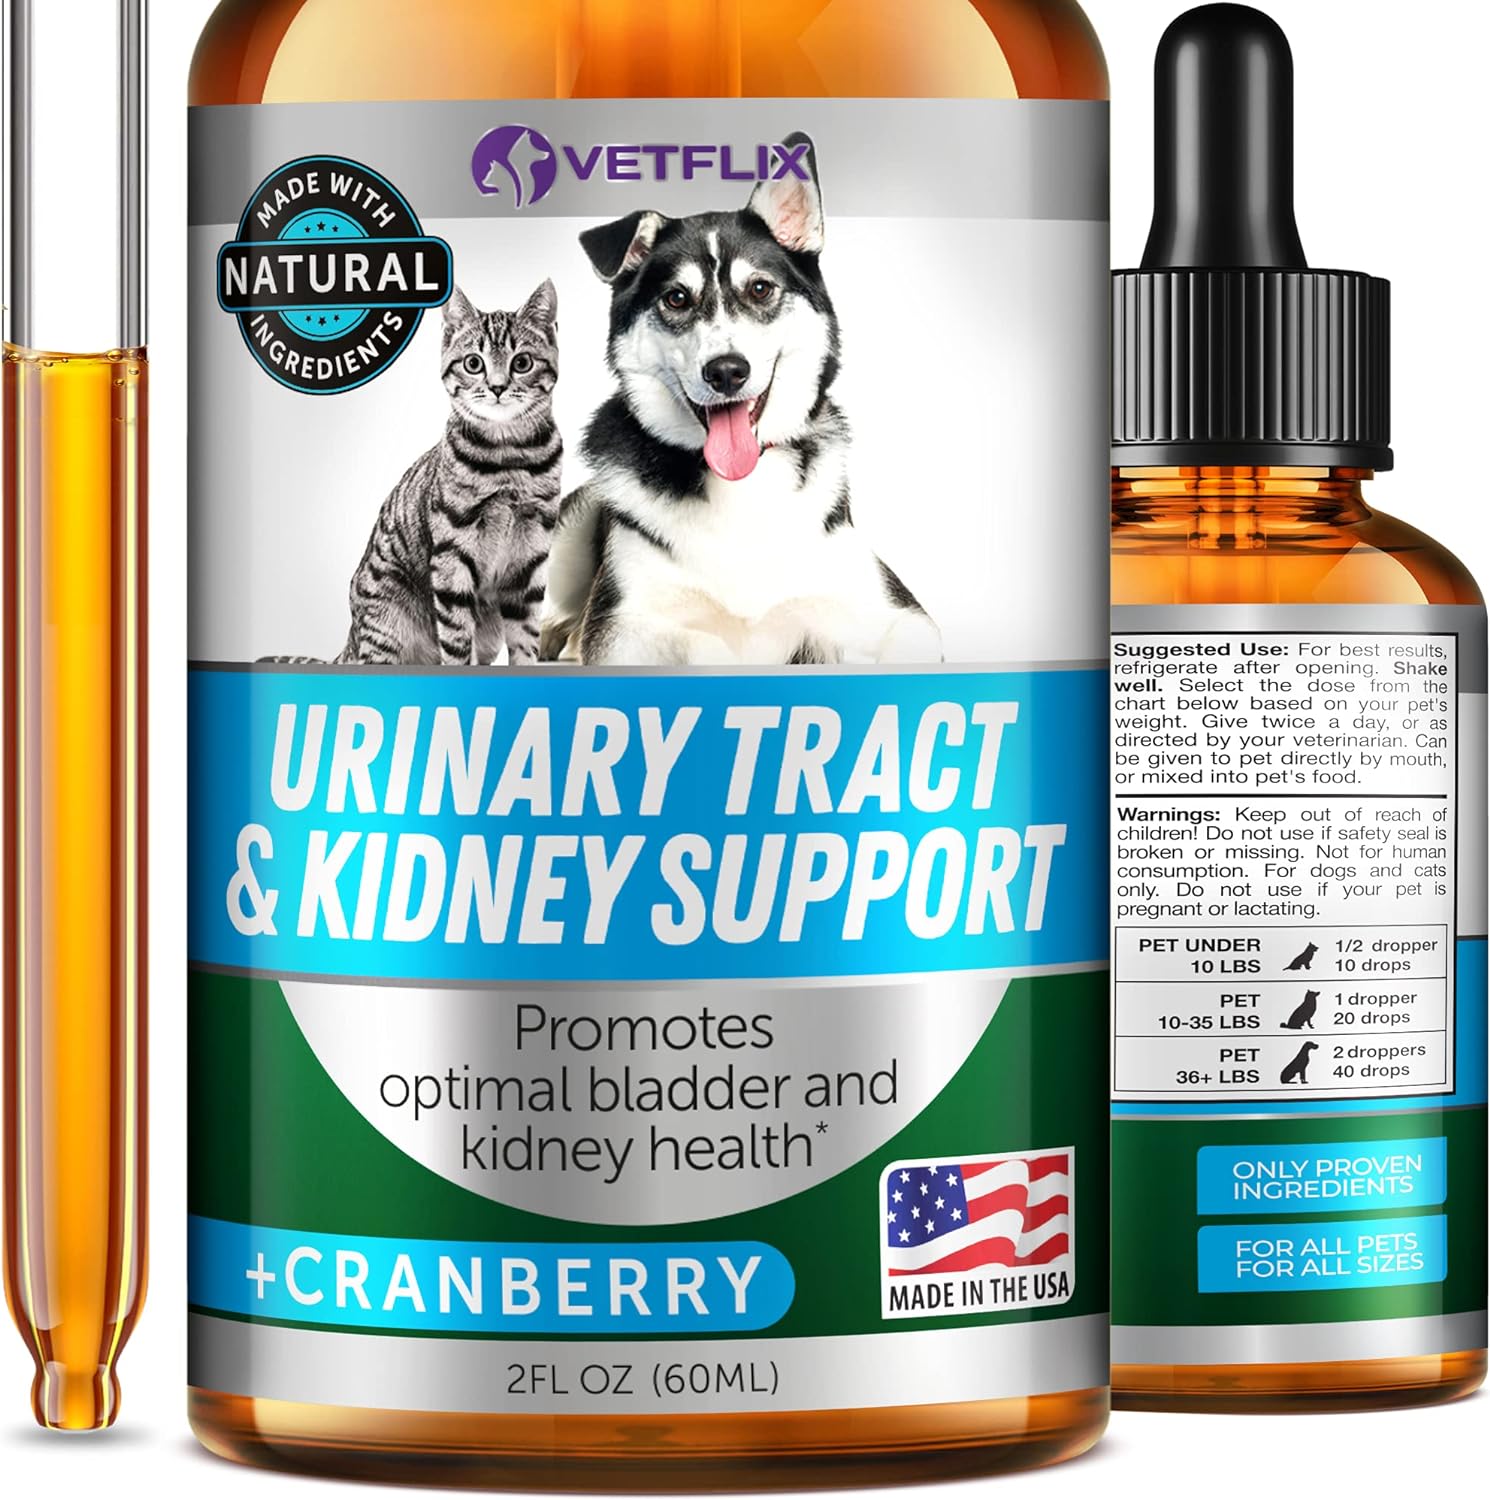 Cranberry Dog & Cat UTI Treatment - Best UTI for Pets - Made in USA - Dog & Cat Kidney Support - Cat Bladder Drops - Pet Immune Health Supplement - Marshmallow, Dandelion Root, Pumpkin Seed